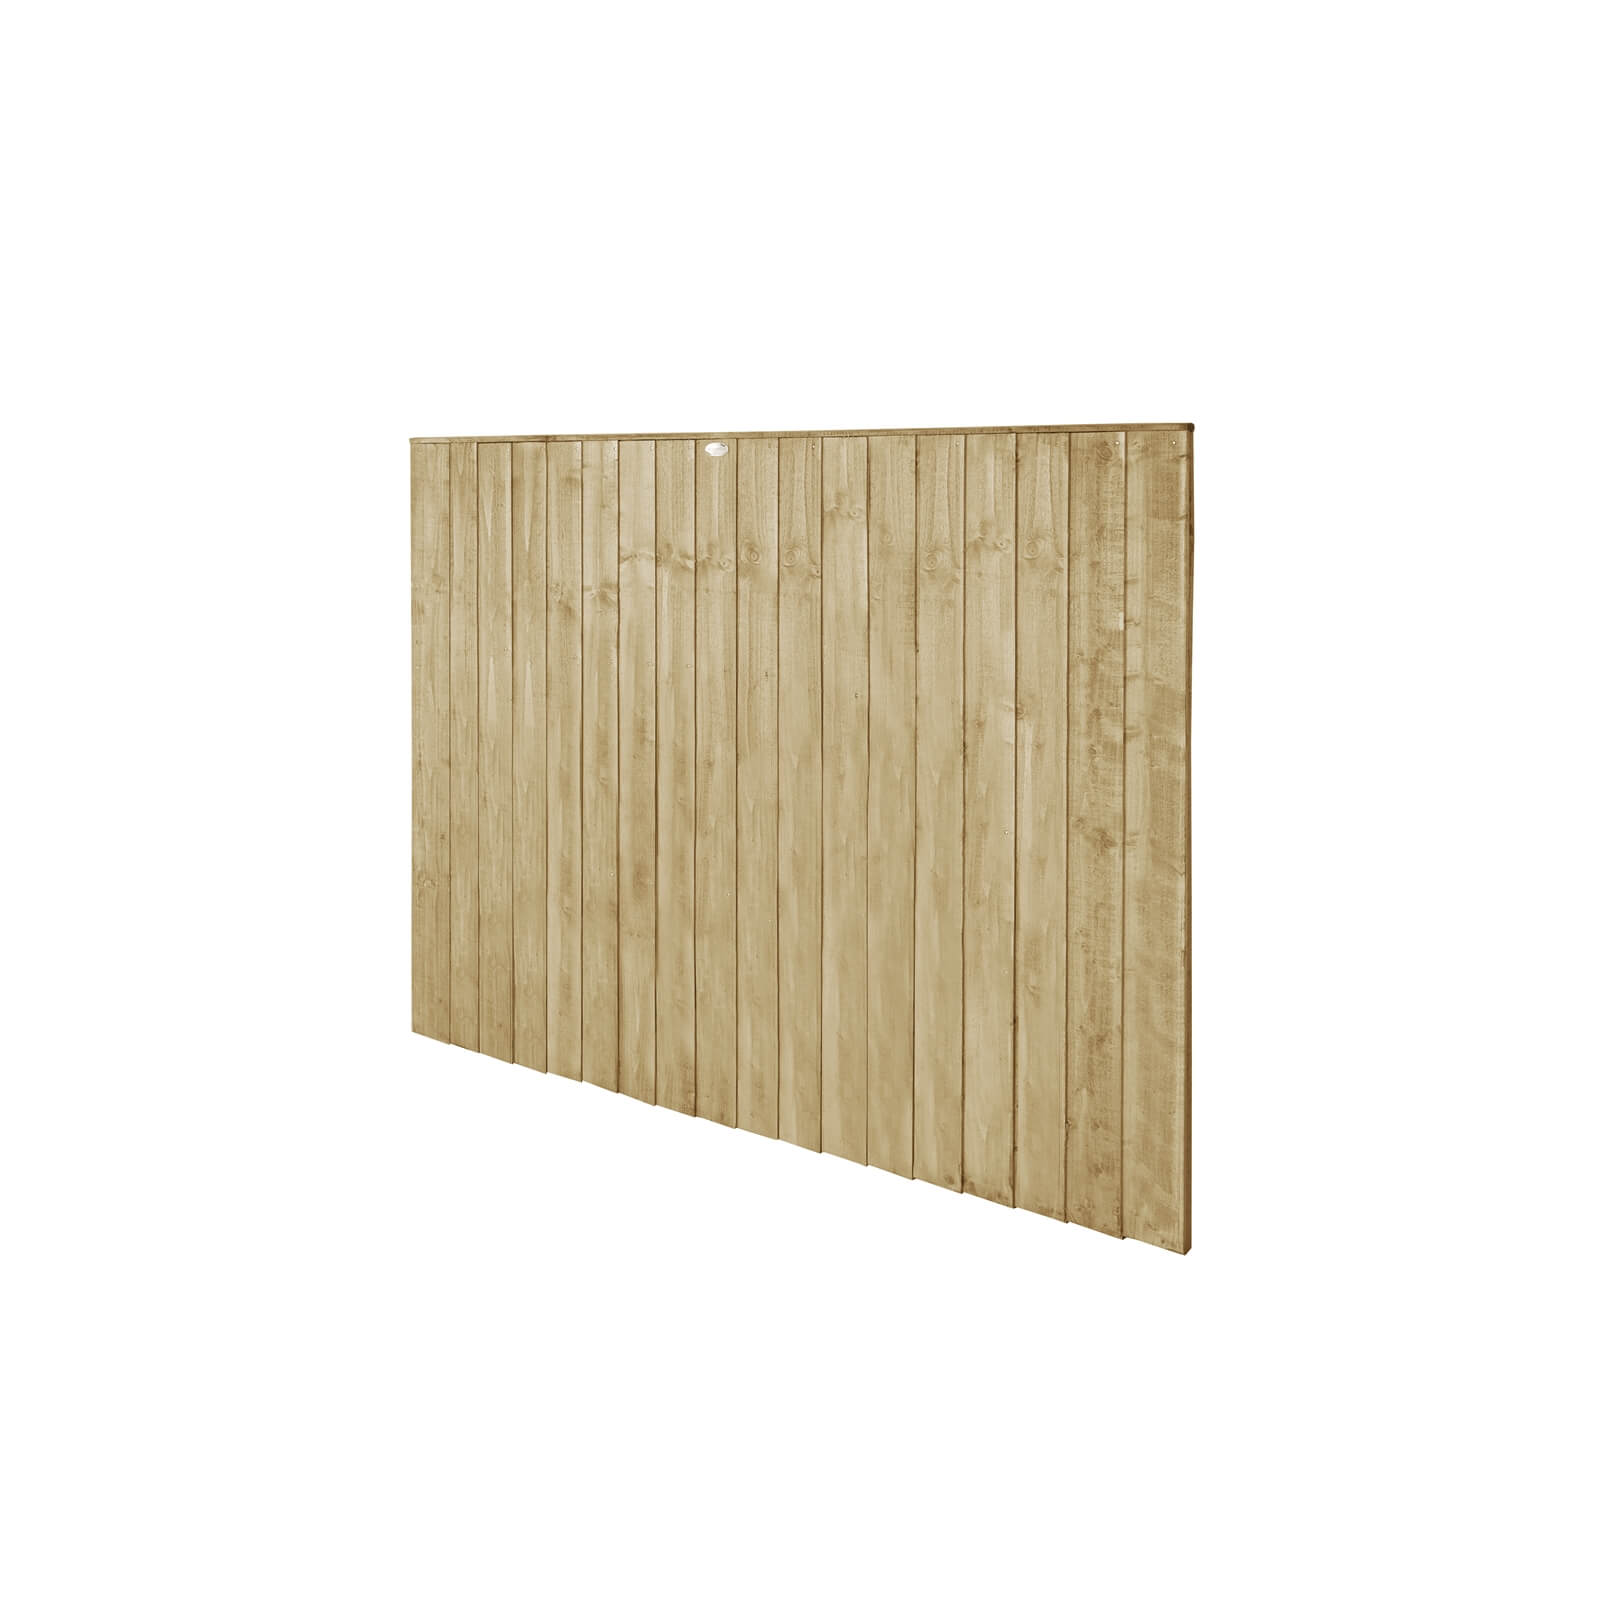 6ft x 5ft (1.83m x 1.54m) Pressure Treated Featheredge Fence Panel - Pack of 20